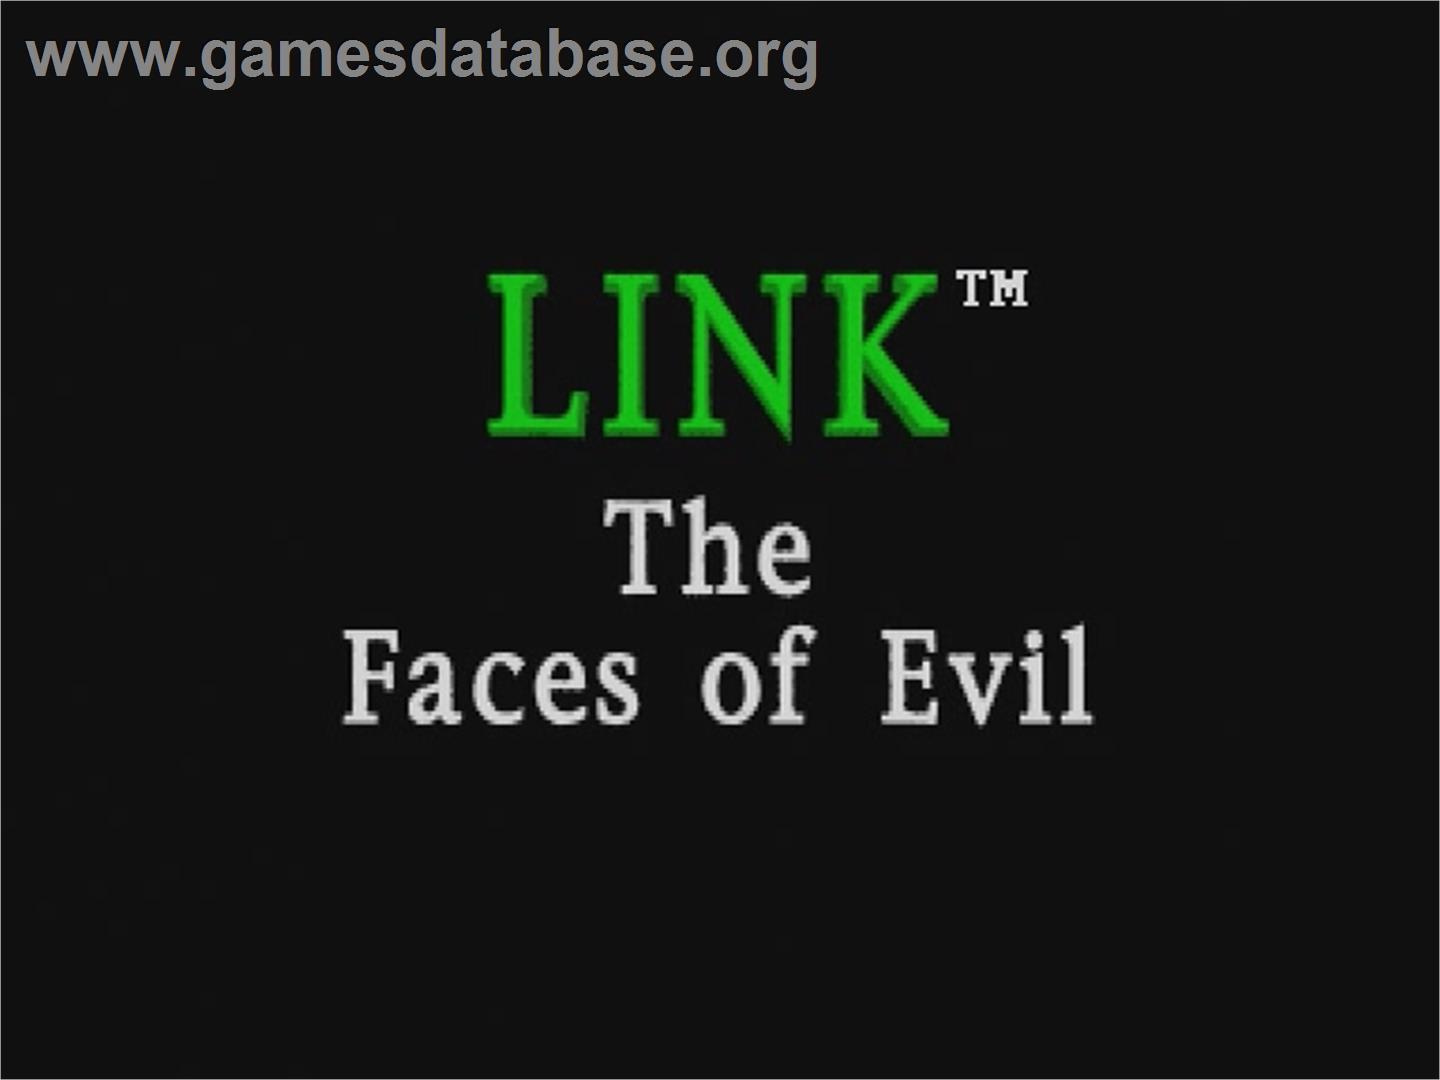 Link: The Faces of Evil - Philips CD-i - Artwork - Title Screen